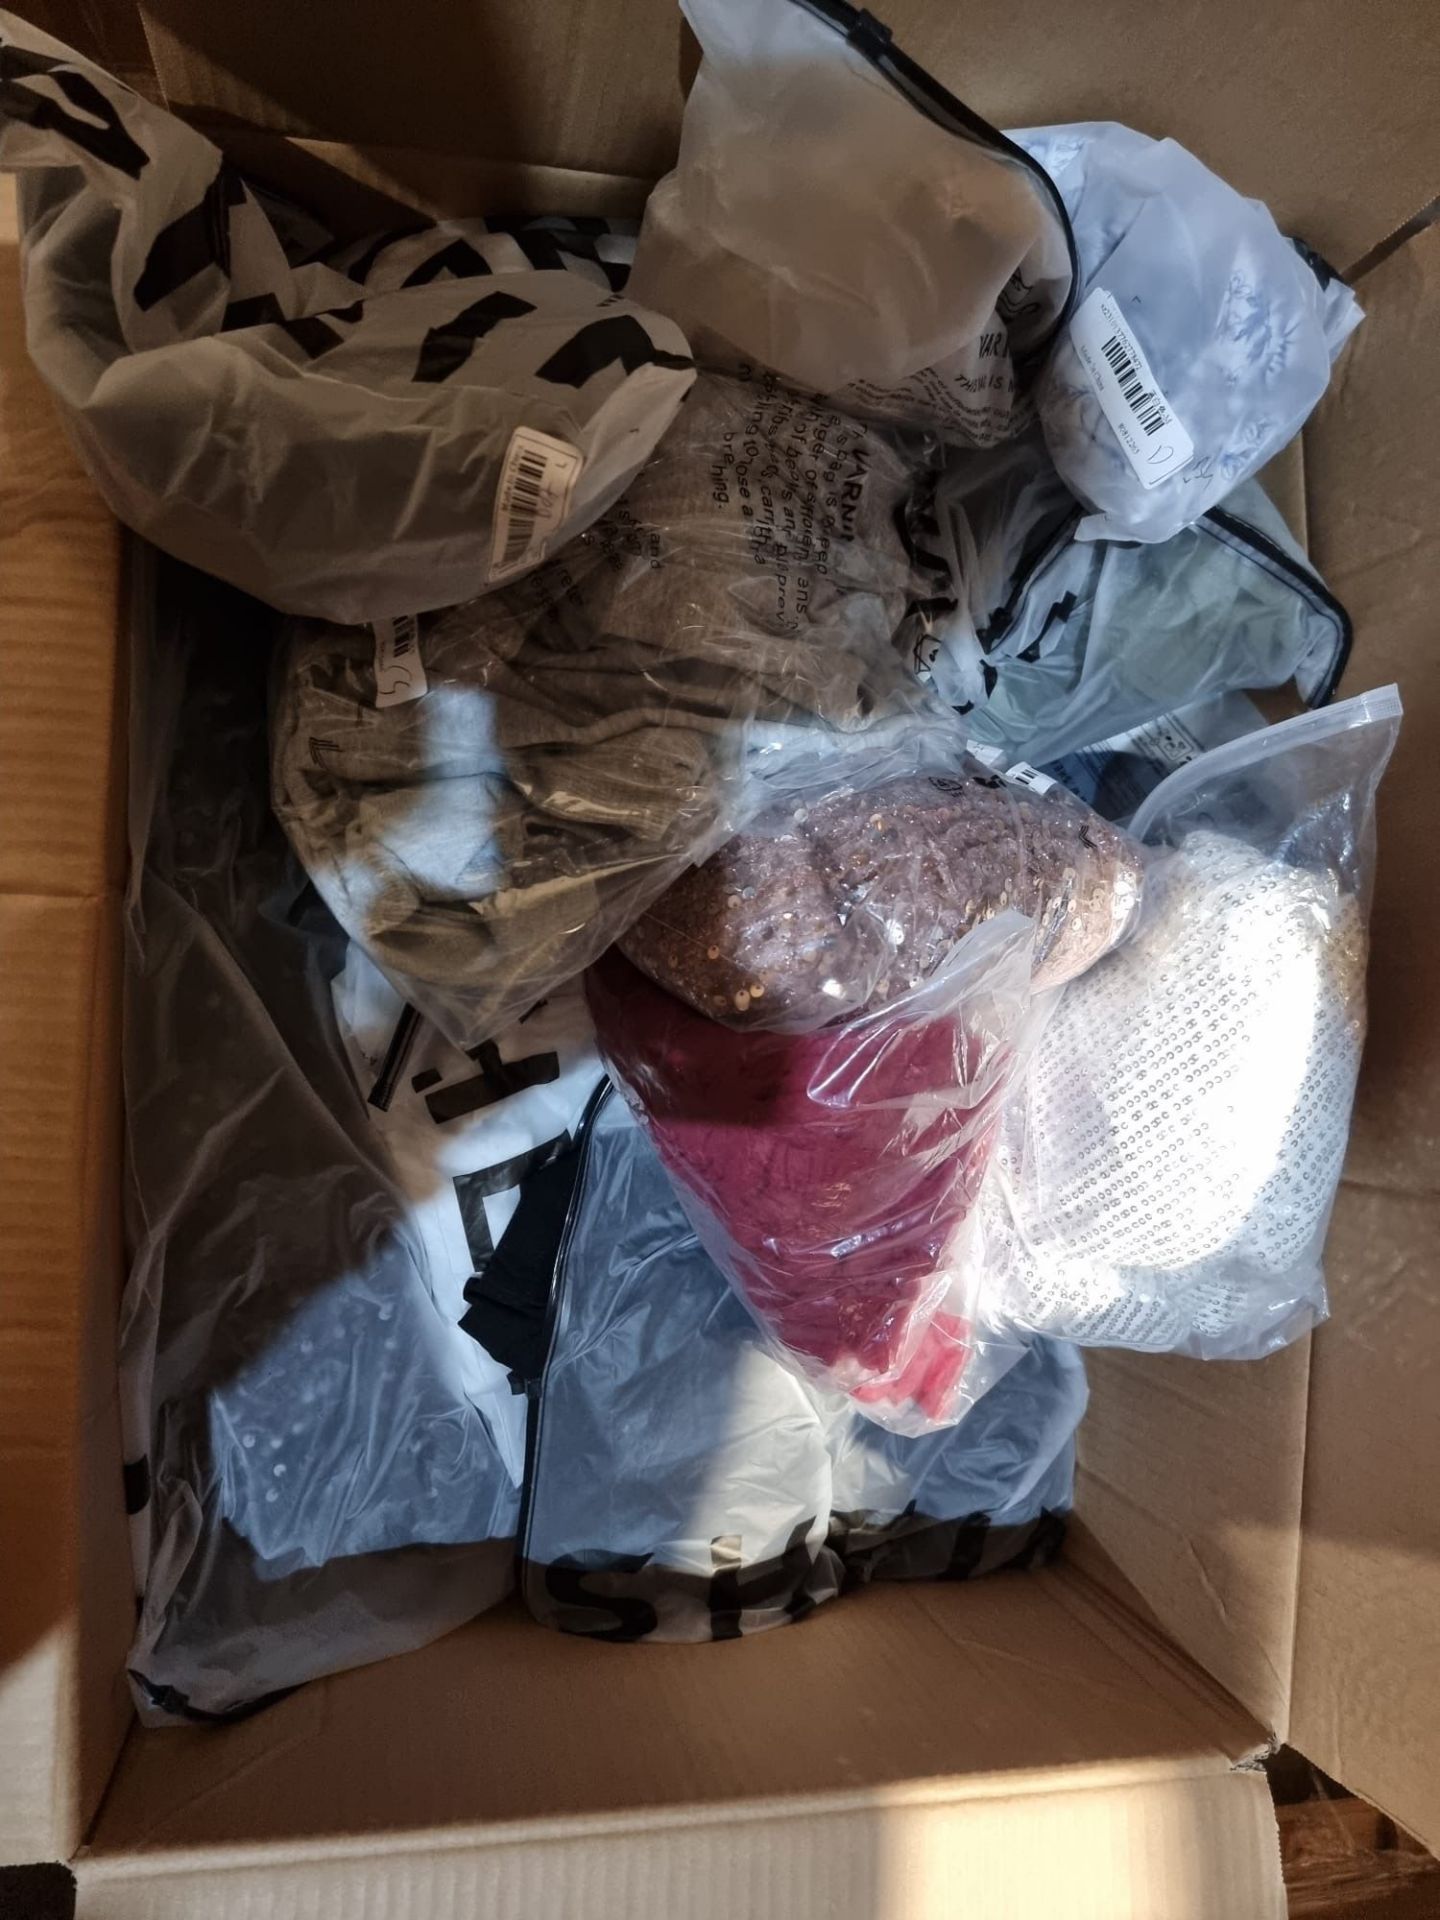 TRADE LOT 100 x BAGGED/BOXED ITEMS FROM A MAJOR ONLINE RETAILER TO INCLUDE MAINLY CLOTHING &